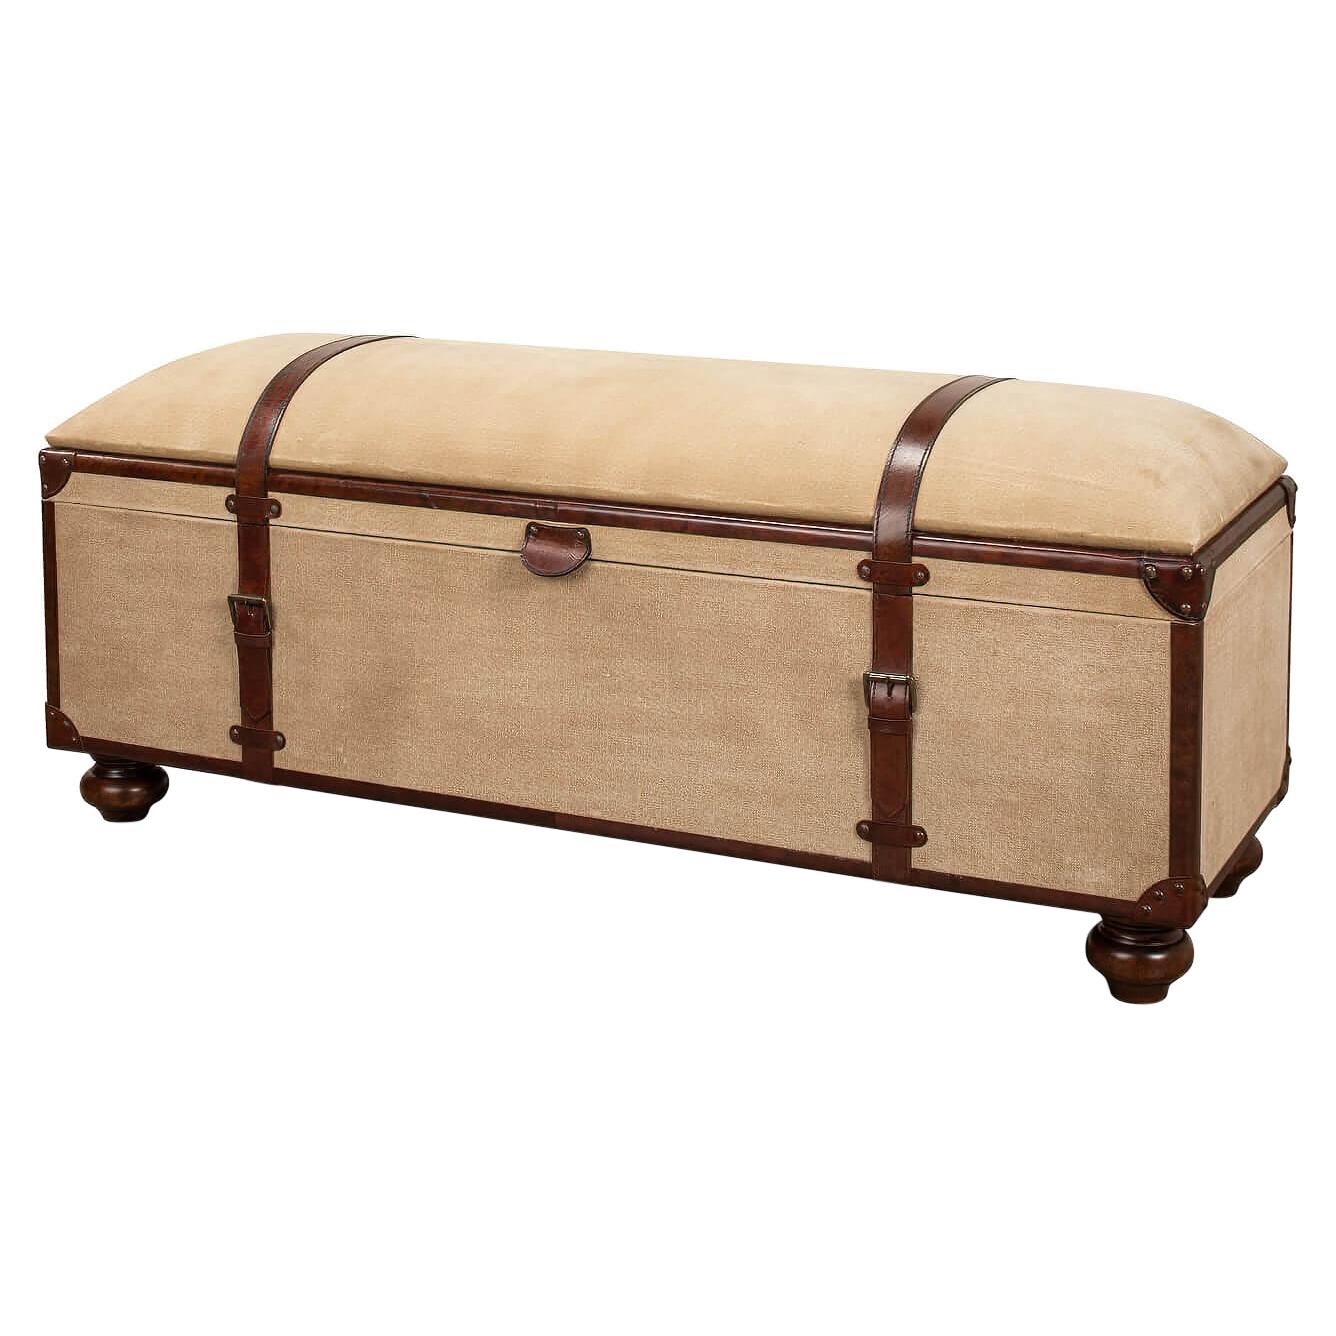 Vintage-Style Leather and Canvas Trunk Bench